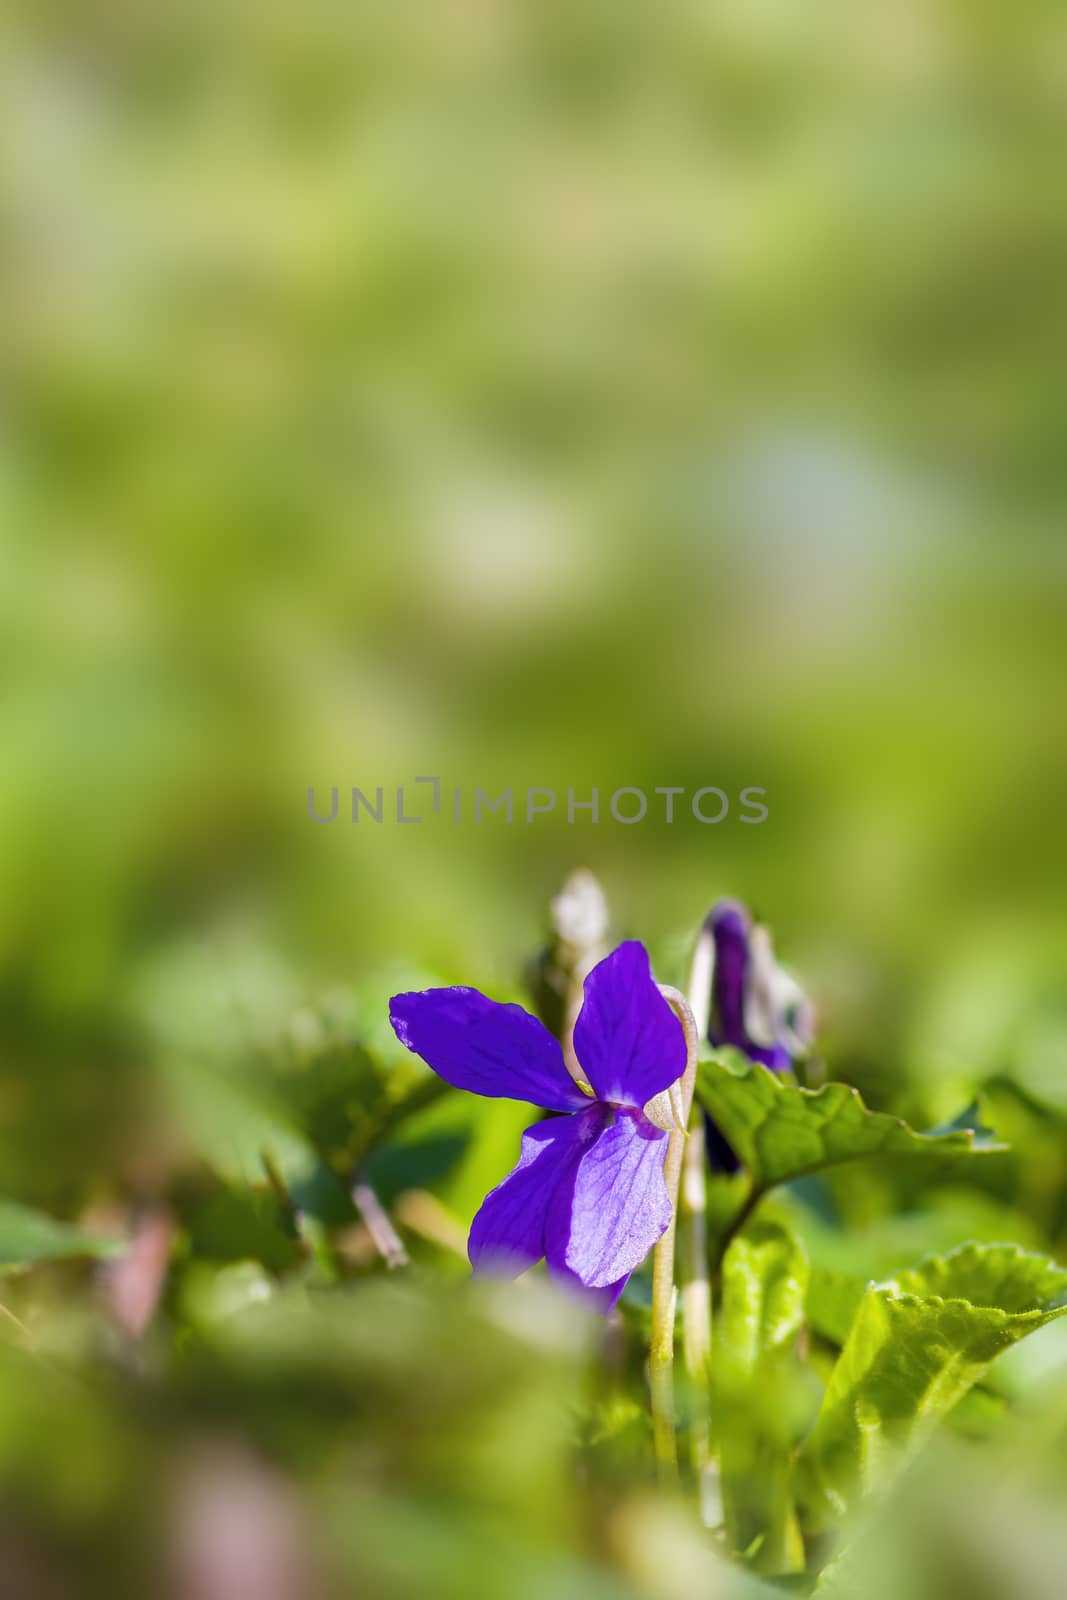 a soft flower blossom in a nature garden by mario_plechaty_photography